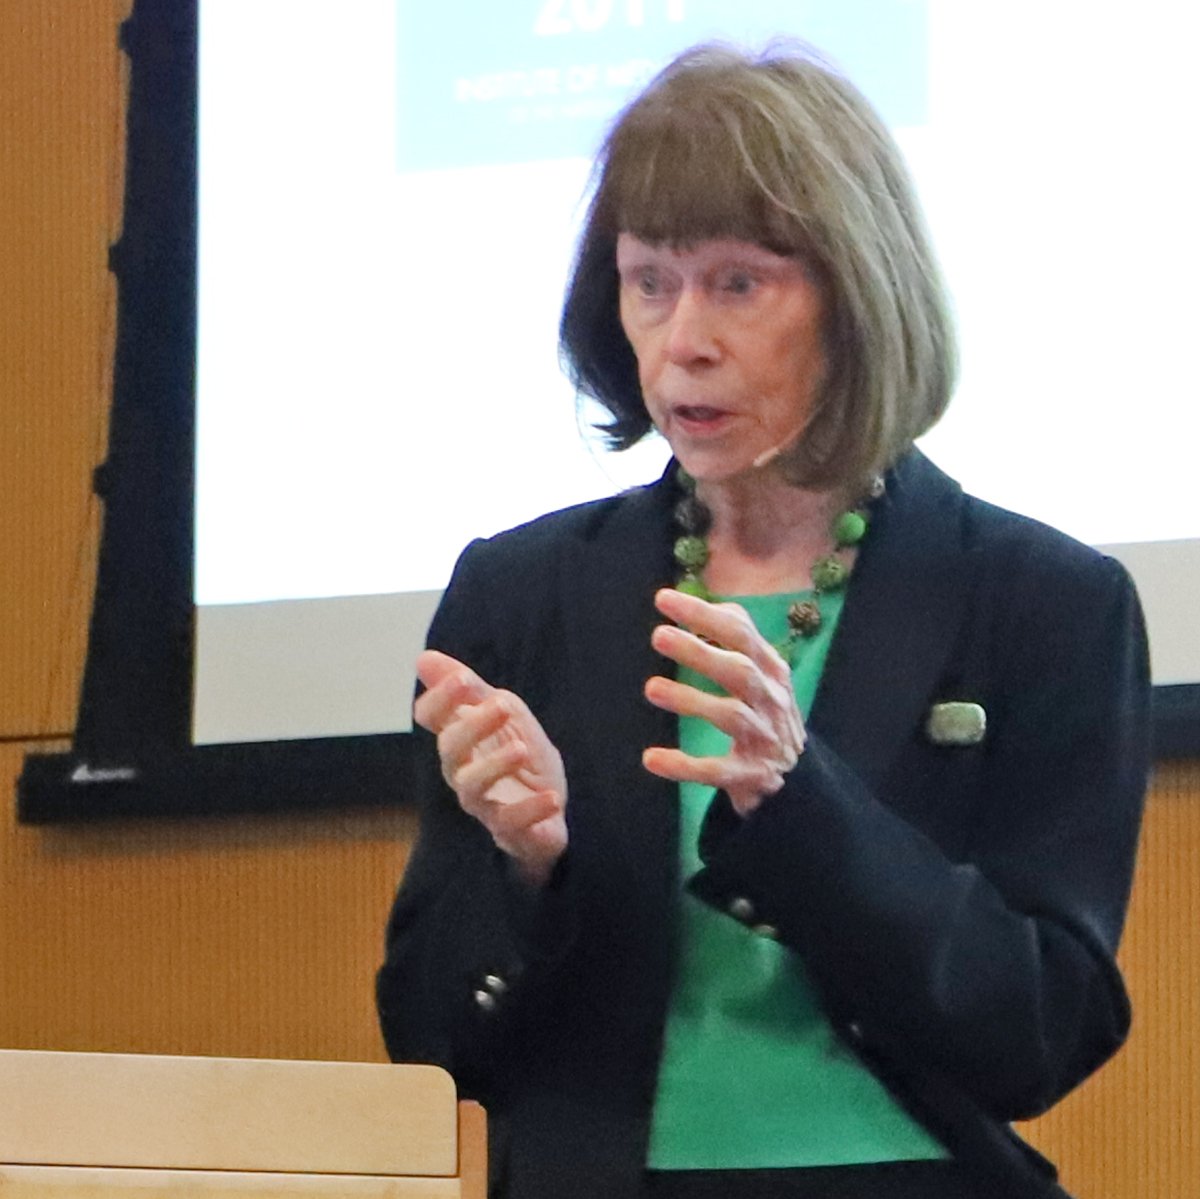 Dr. Patricia Grady delivers the inaugural Jane and Robert Cizik Research Lecture in March 2022.